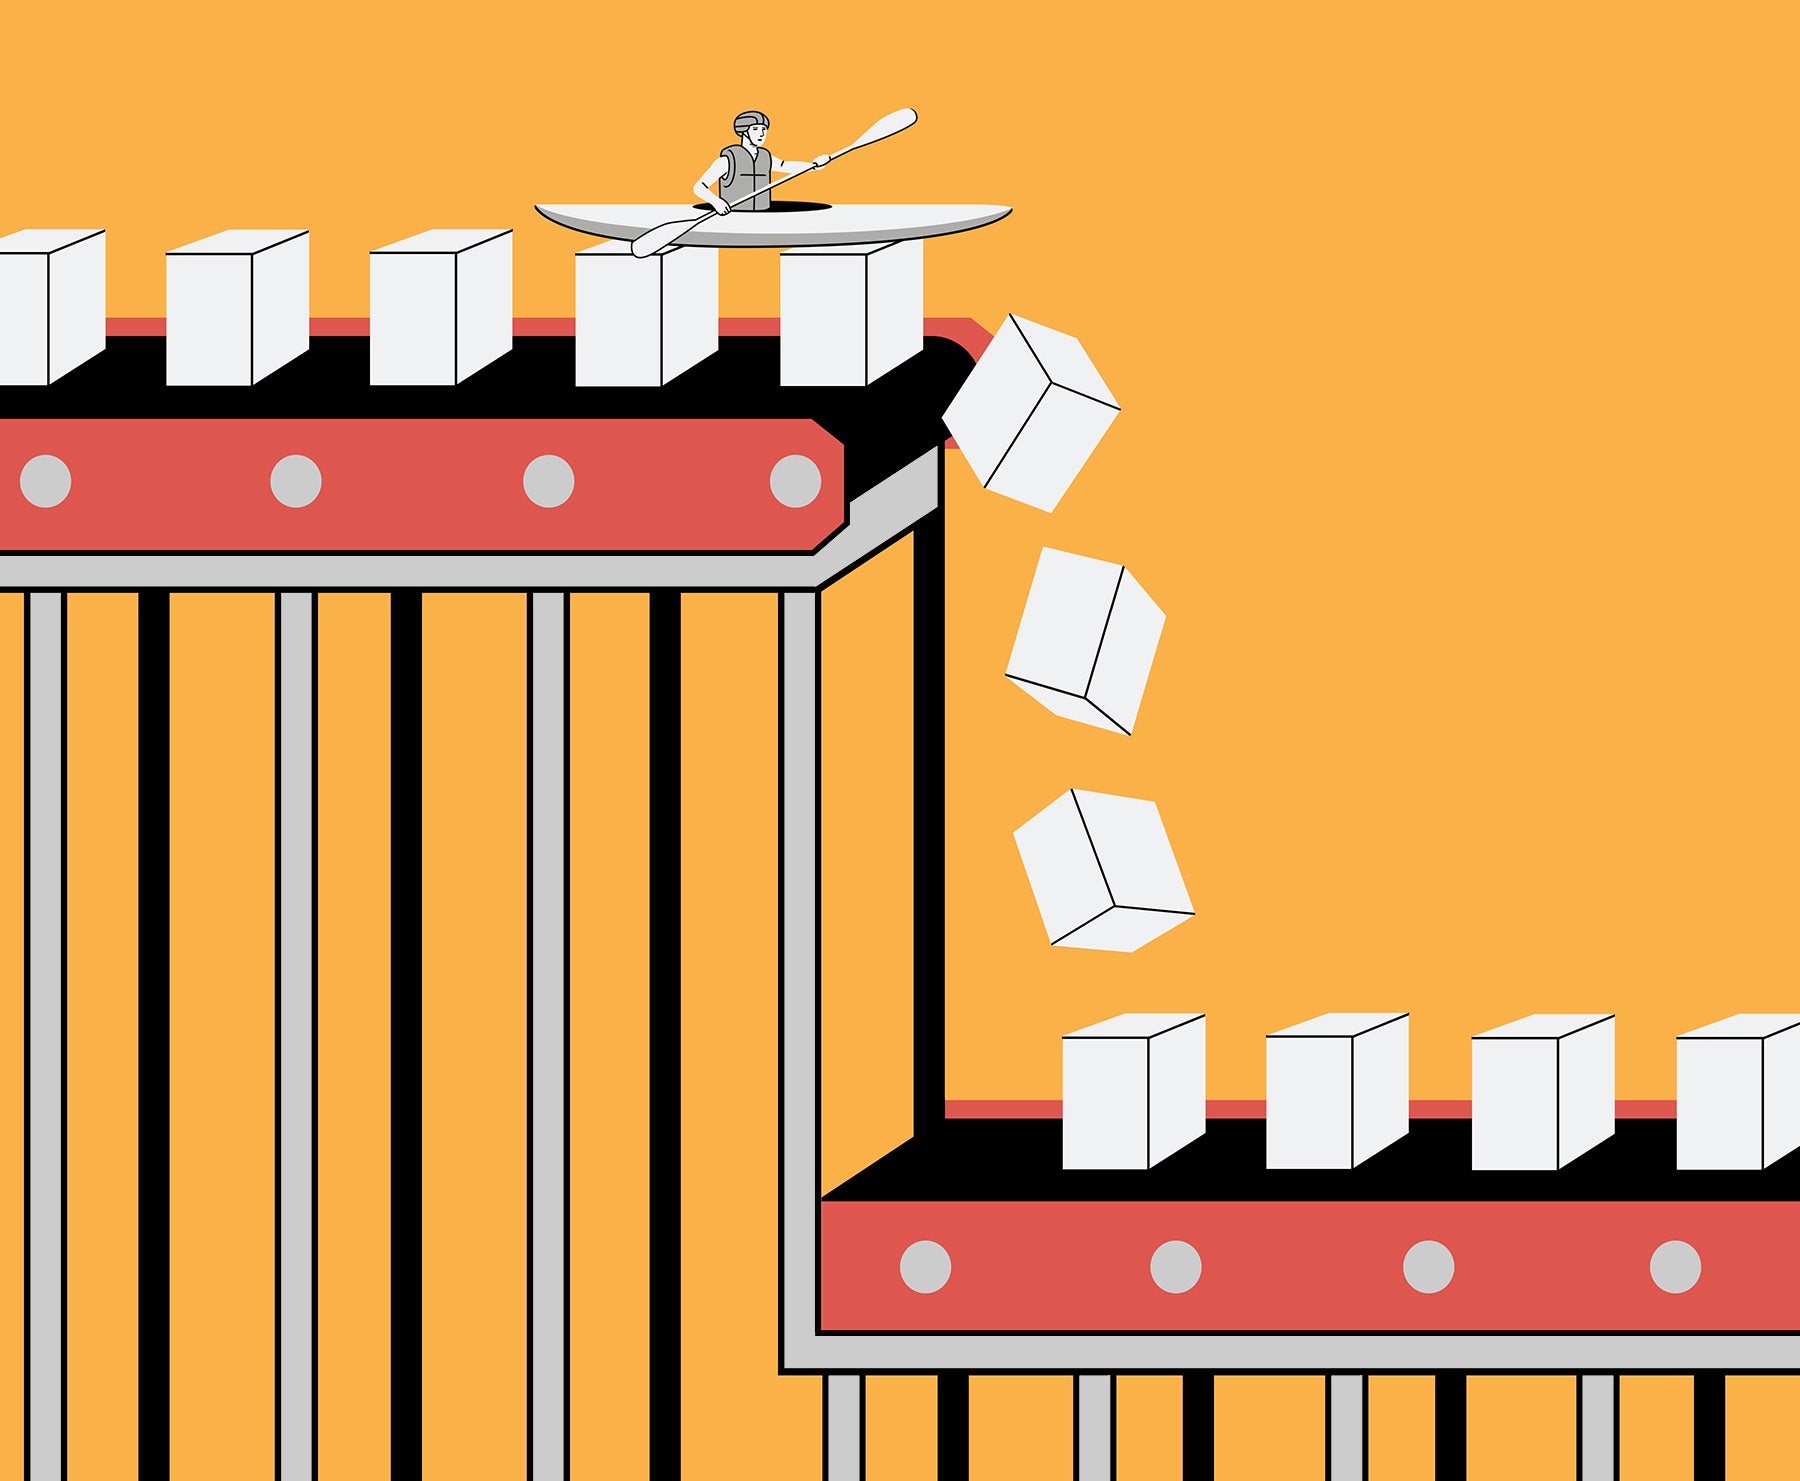 Illustration of a person kayaking across an assembly line of boxes, about to spill onto a lower conveyer belt